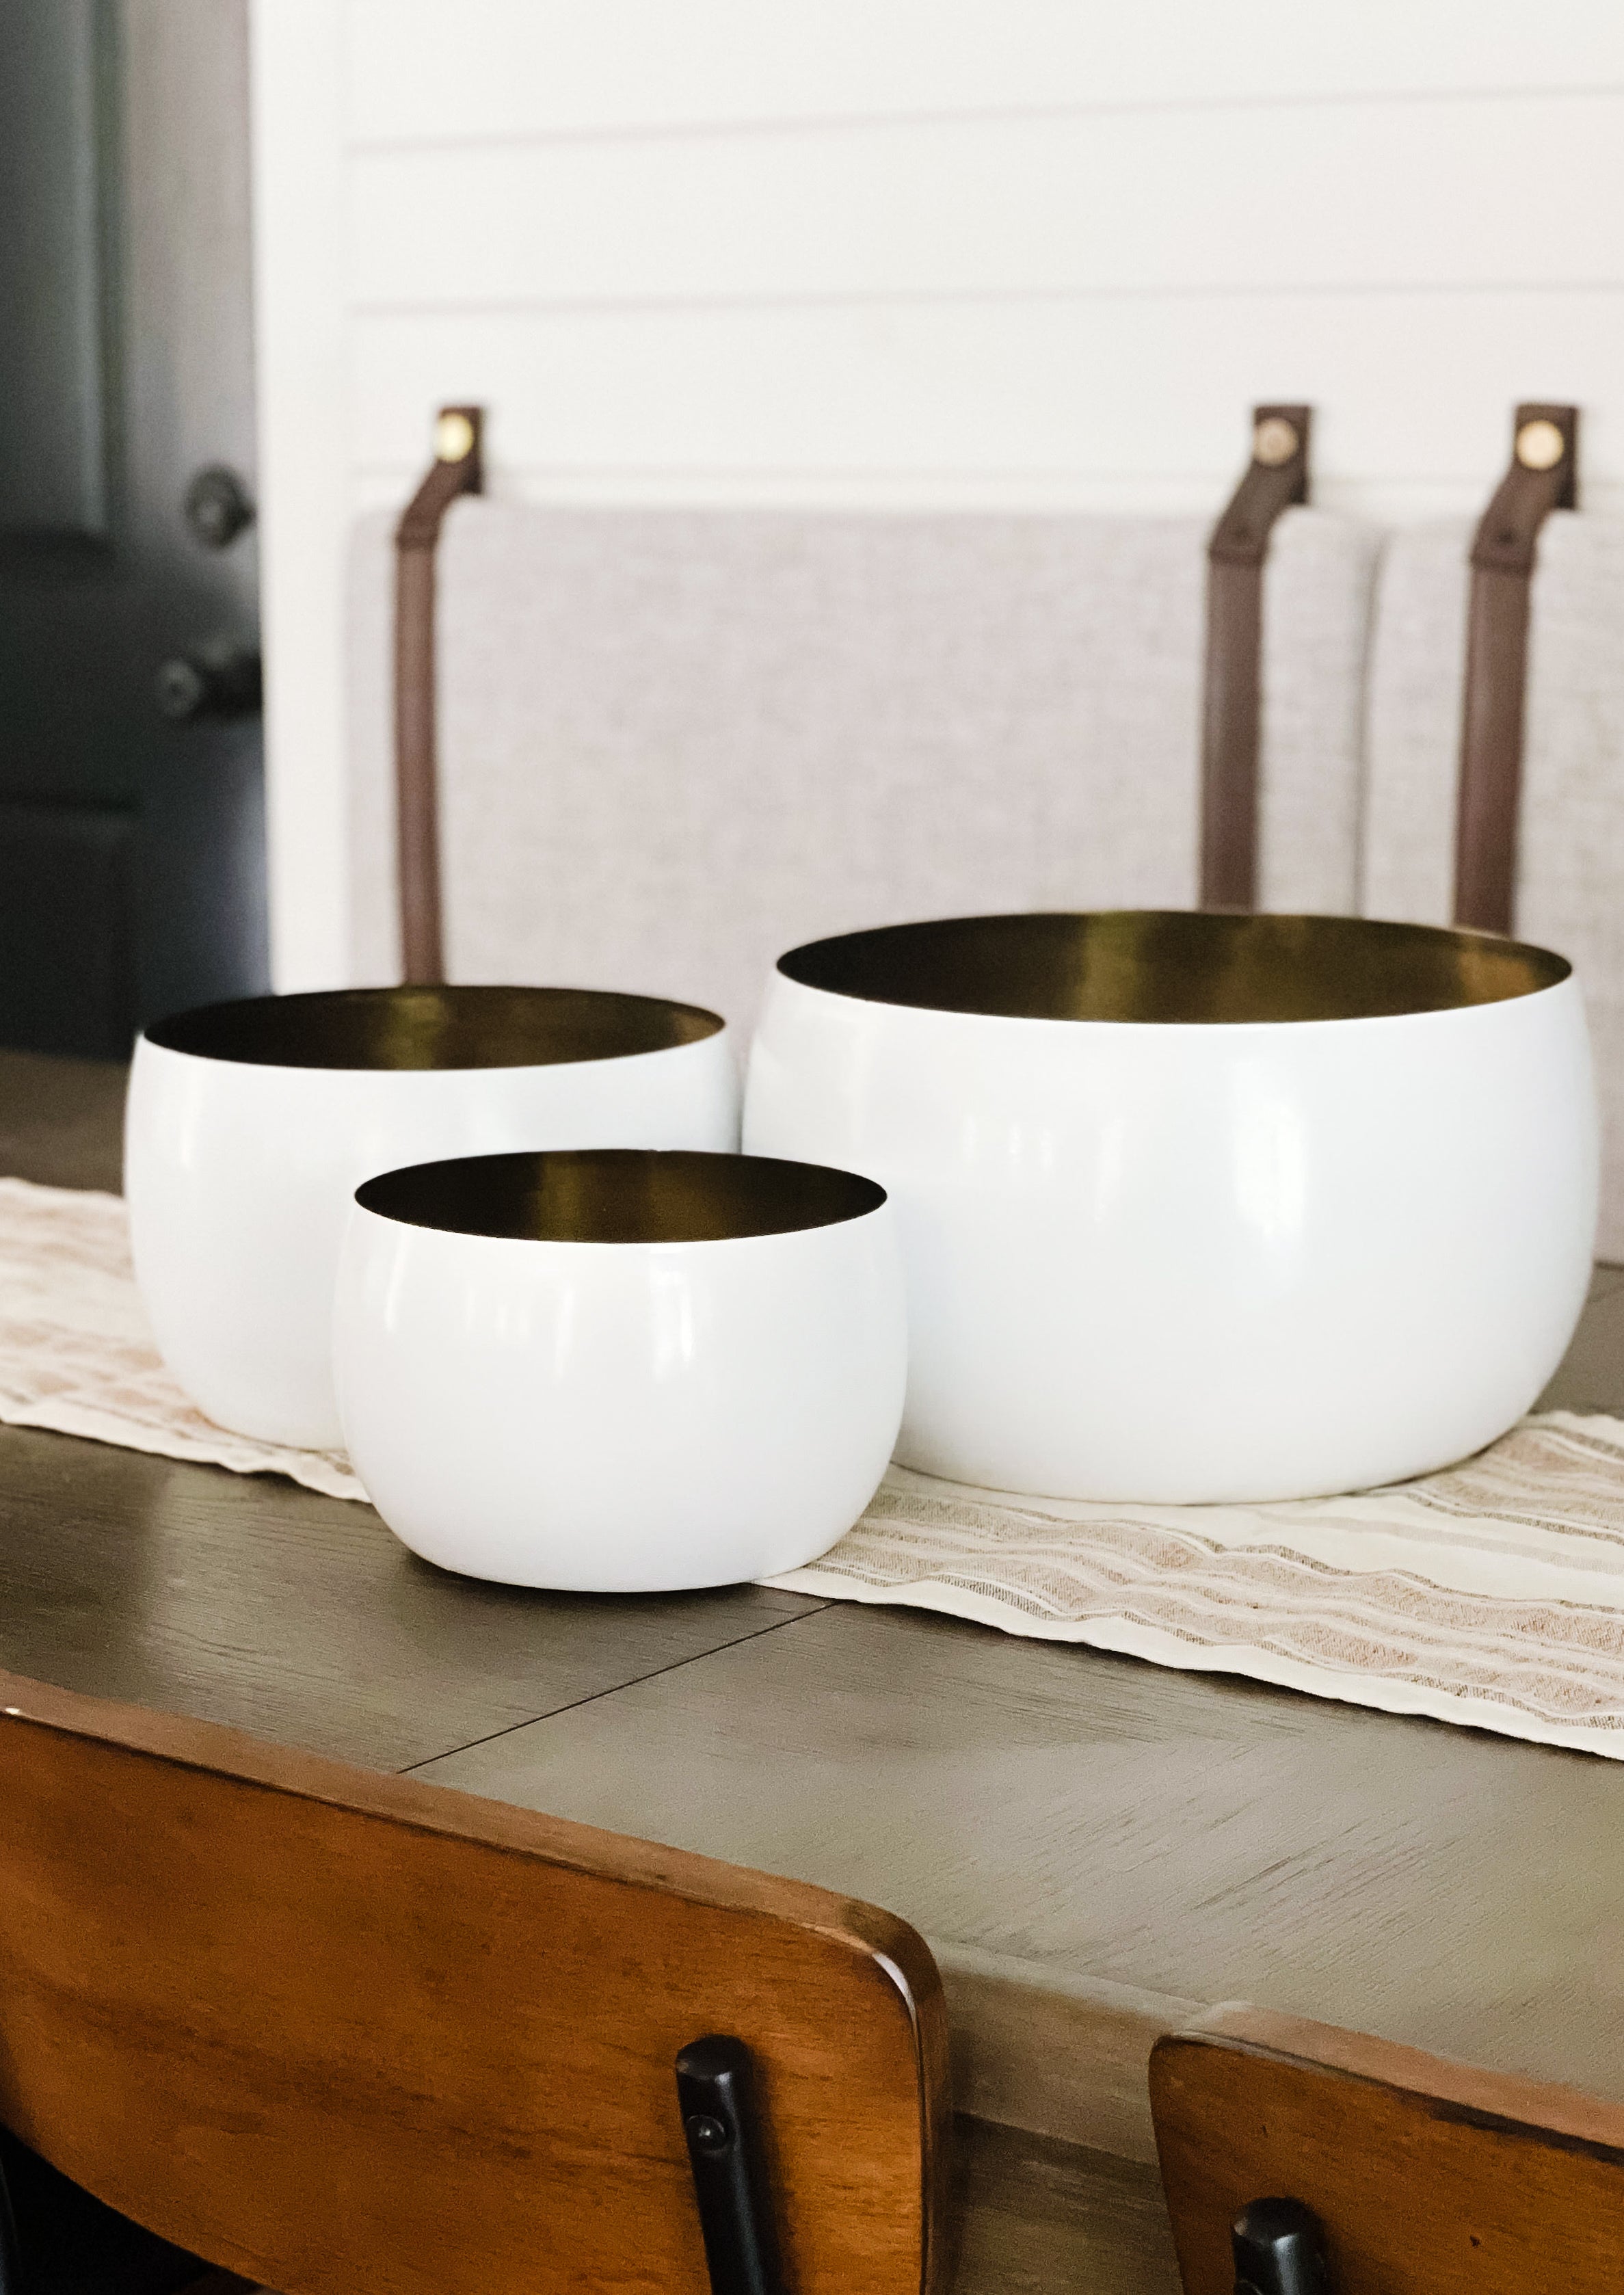 Decorative white bowls with antique brass finish on dining table.